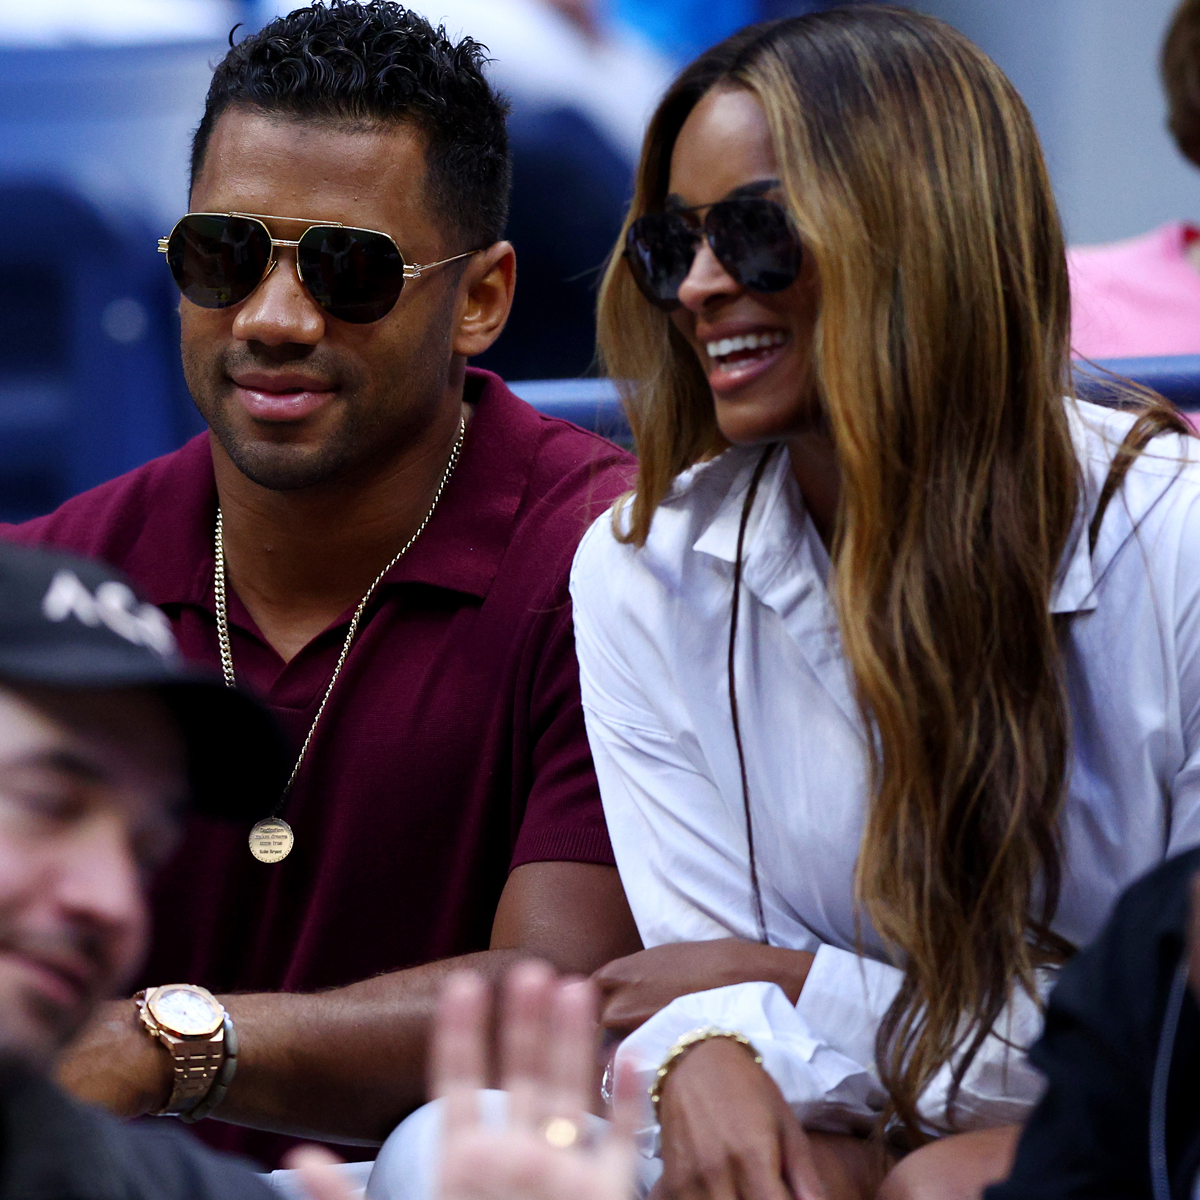 Ciara, Russell Wilson and Others Support Serena Williams at U.S. Open